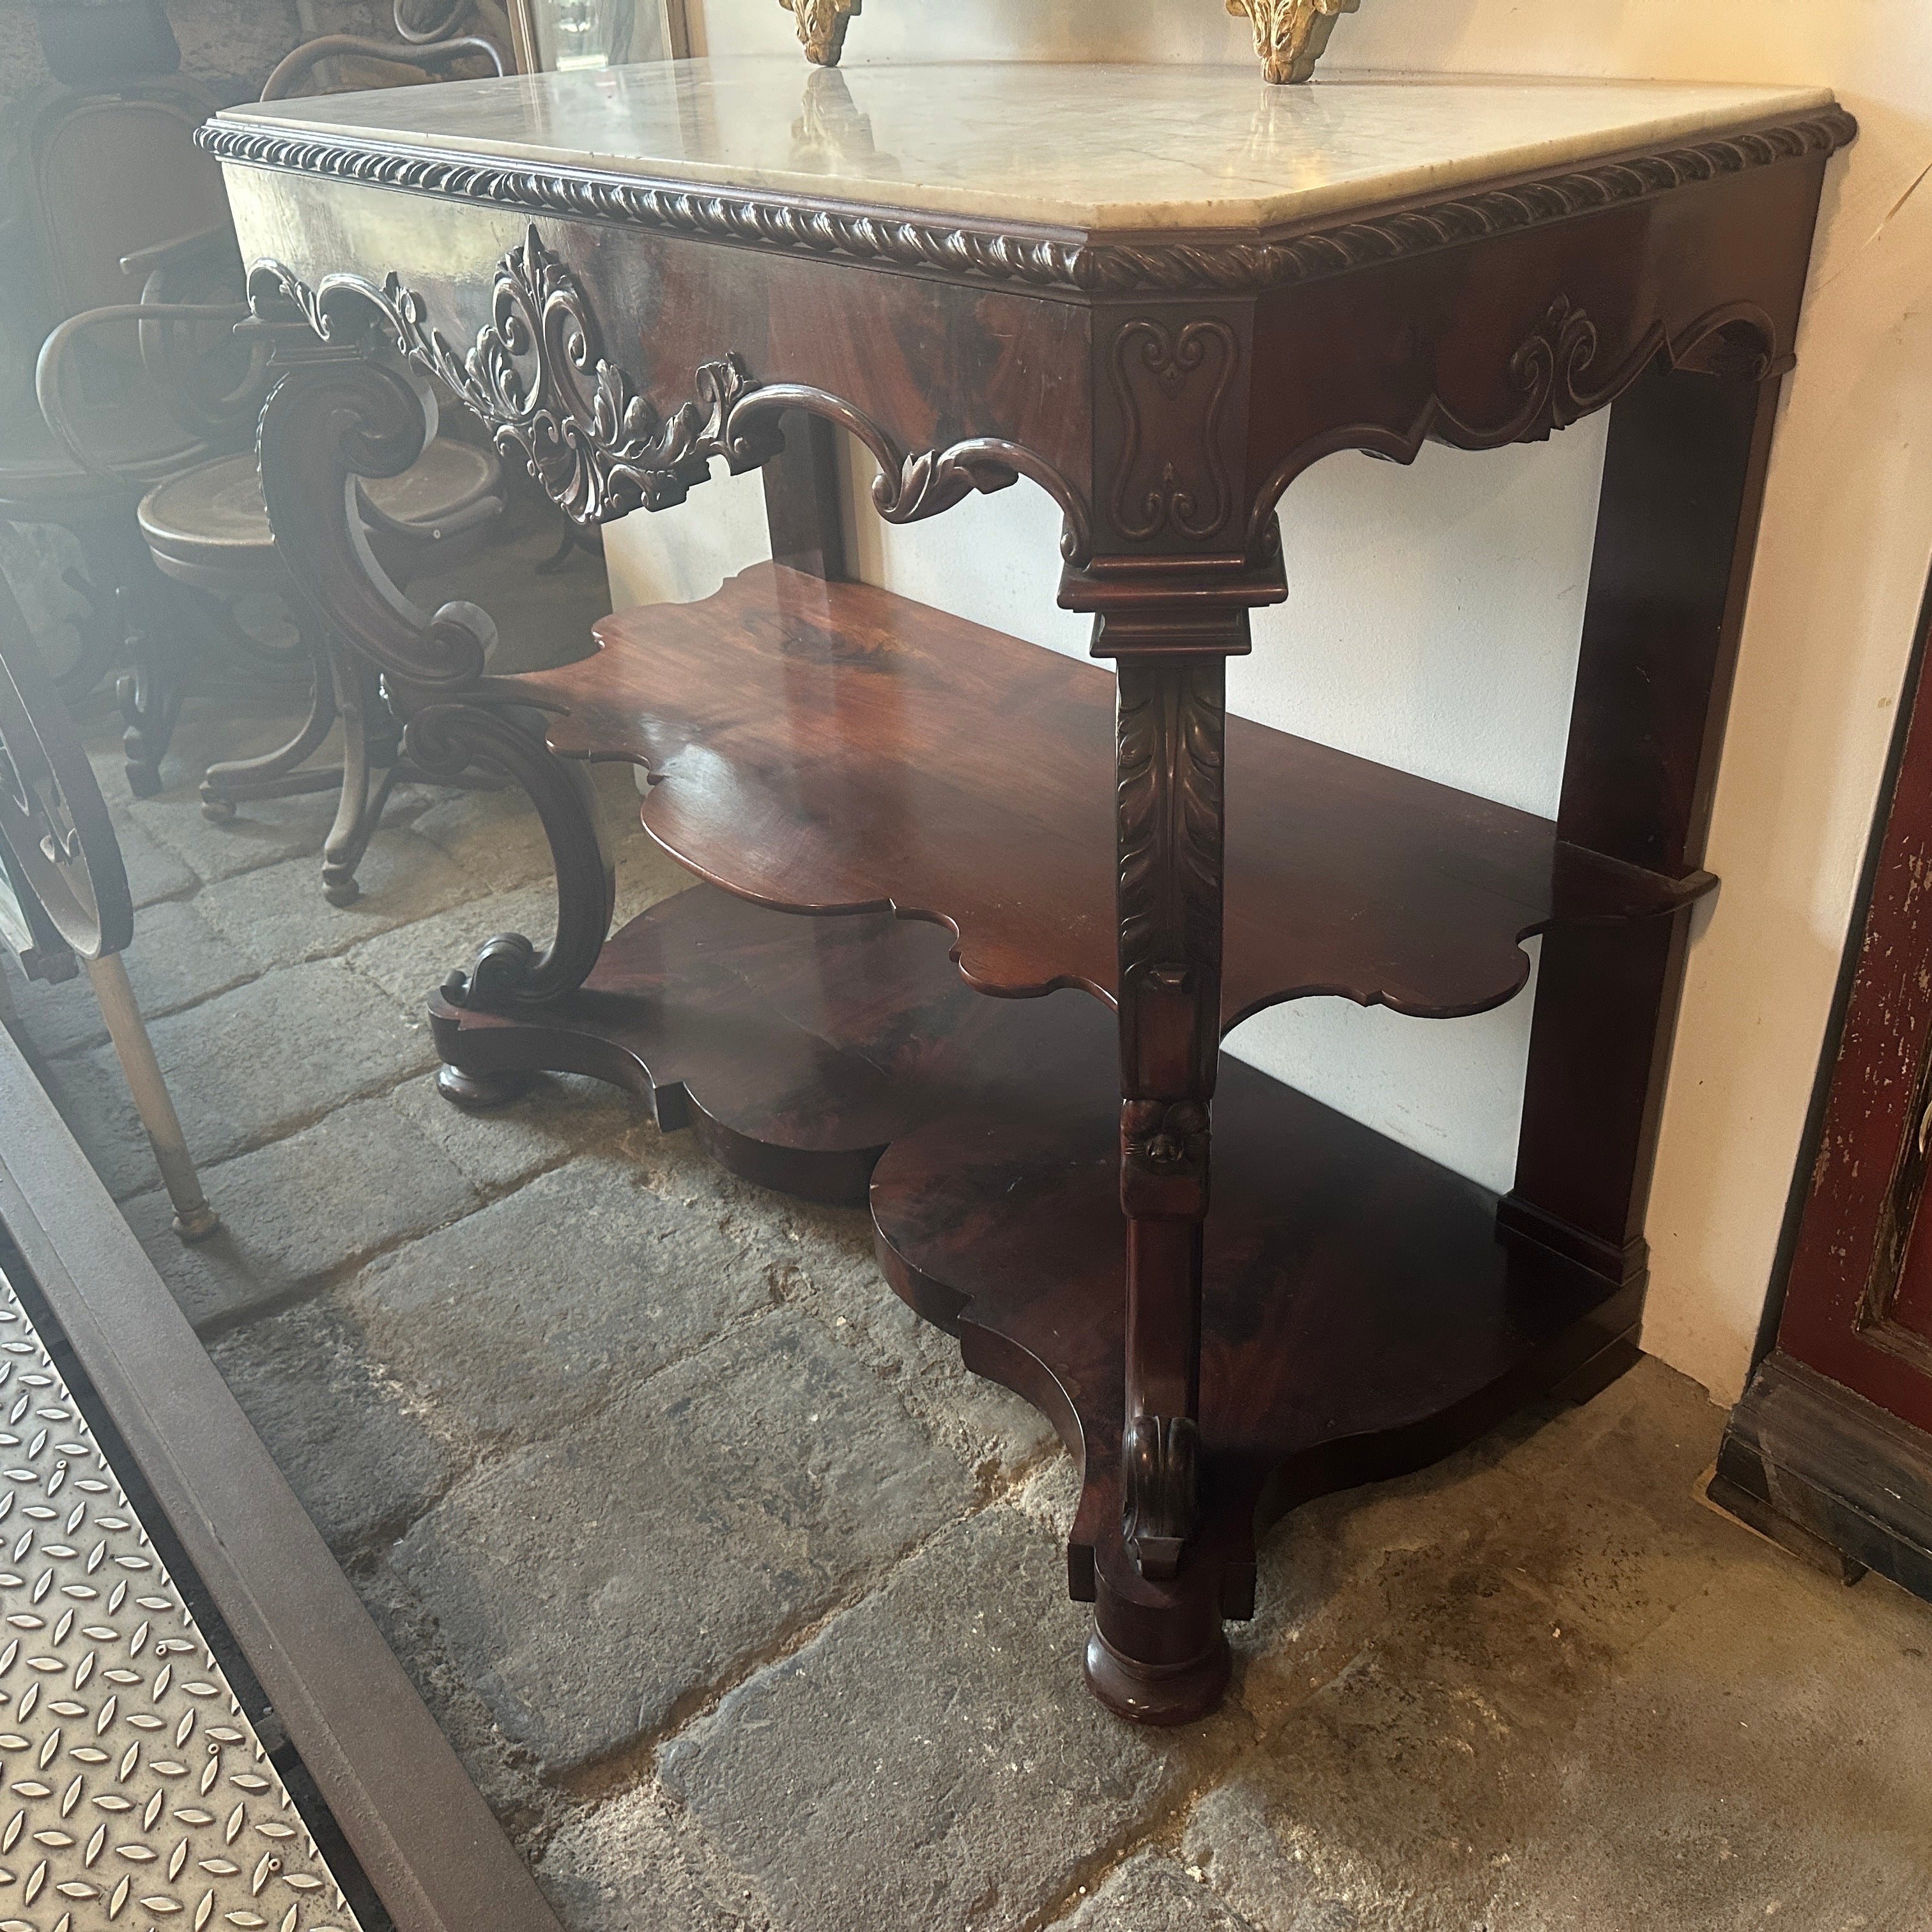 This Italian console is a piece of furniture that embodies the elegance and refinement of the Louis Philippe style, which was popular in the mid-19th century. The console is an exquisite example of  craftsmanship, blending the rich warmth of